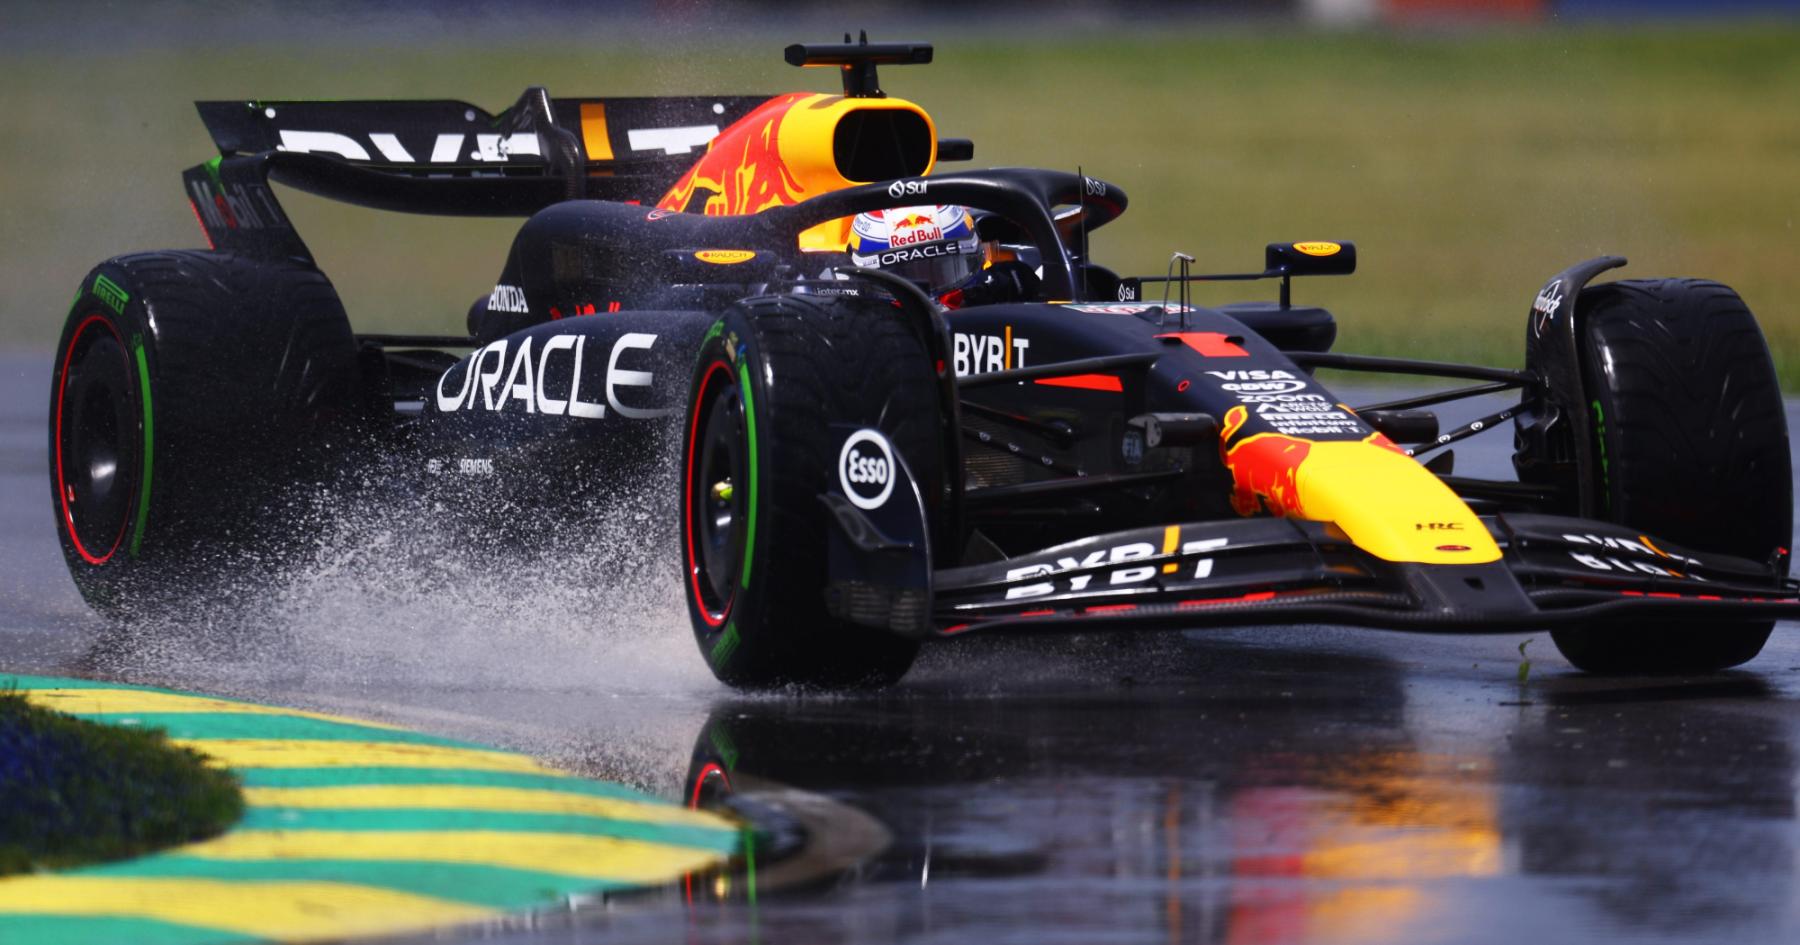 Stormy Skies Ahead: The Canadian Grand Prix Weather Report